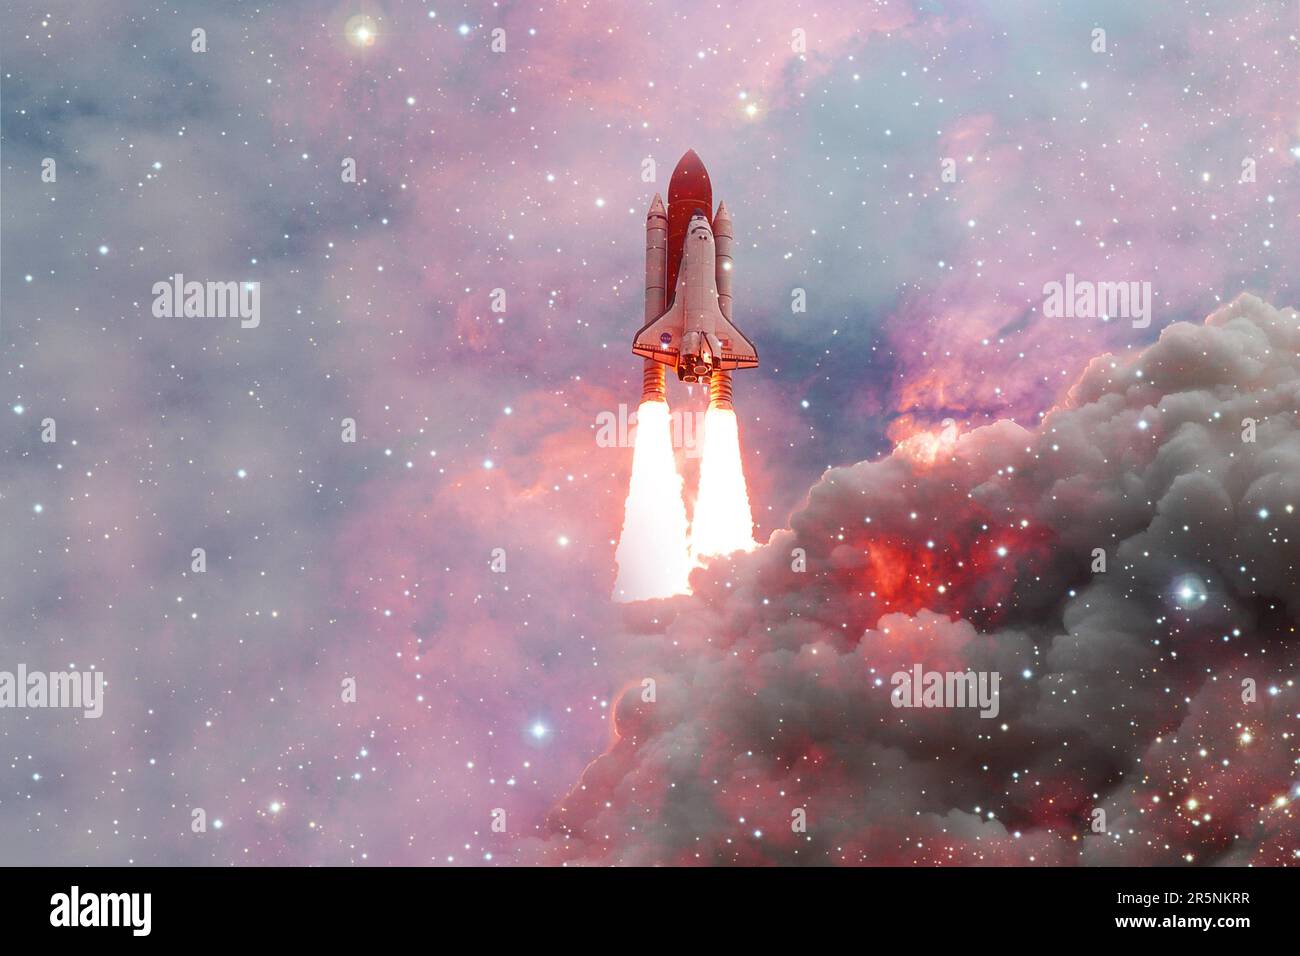 Space Shuttle Atlantis. Cosmos art. Elements of this image furnished by NASA Stock Photo